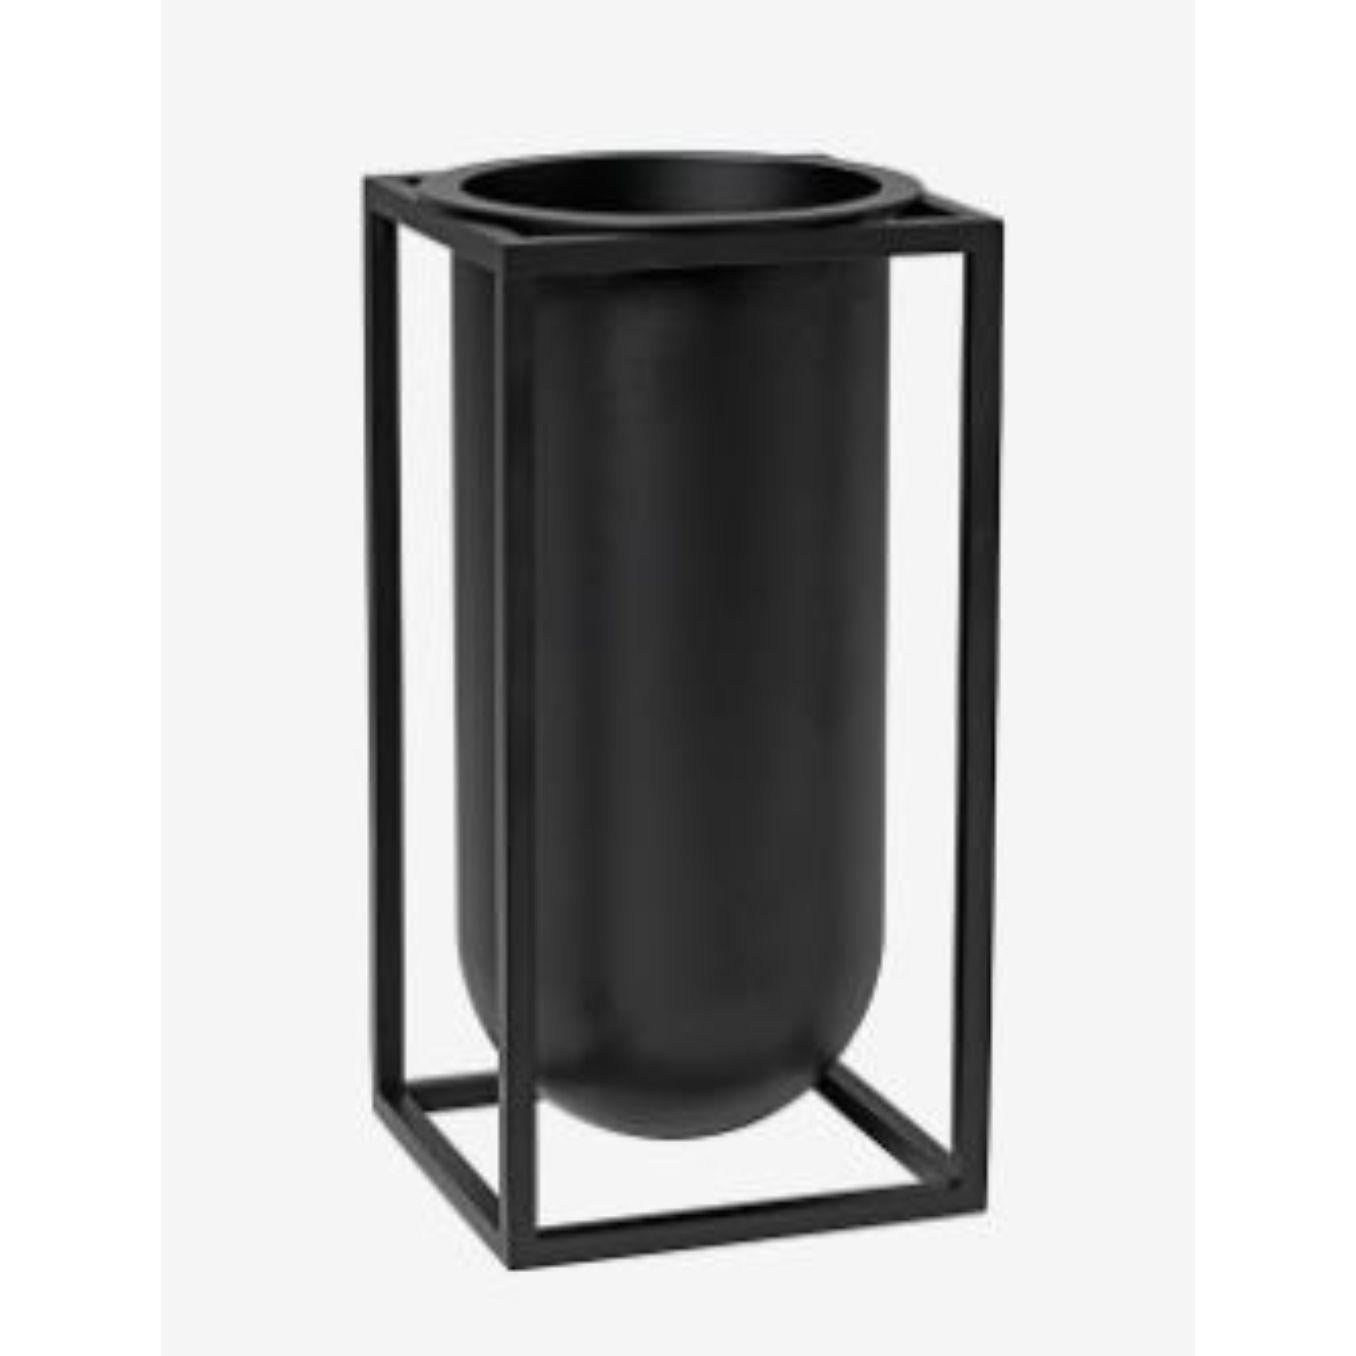 Black Lily Kubus vase by Lassen
Dimensions: D 10 x W 10 x H 20 cm 
Materials: Metal 
Weight: 1.50 Kg

Kubus vase Lily was designed by Søren Lassen in 2018 as the third in the series of vases in the Kubus collection. With its cylindrical